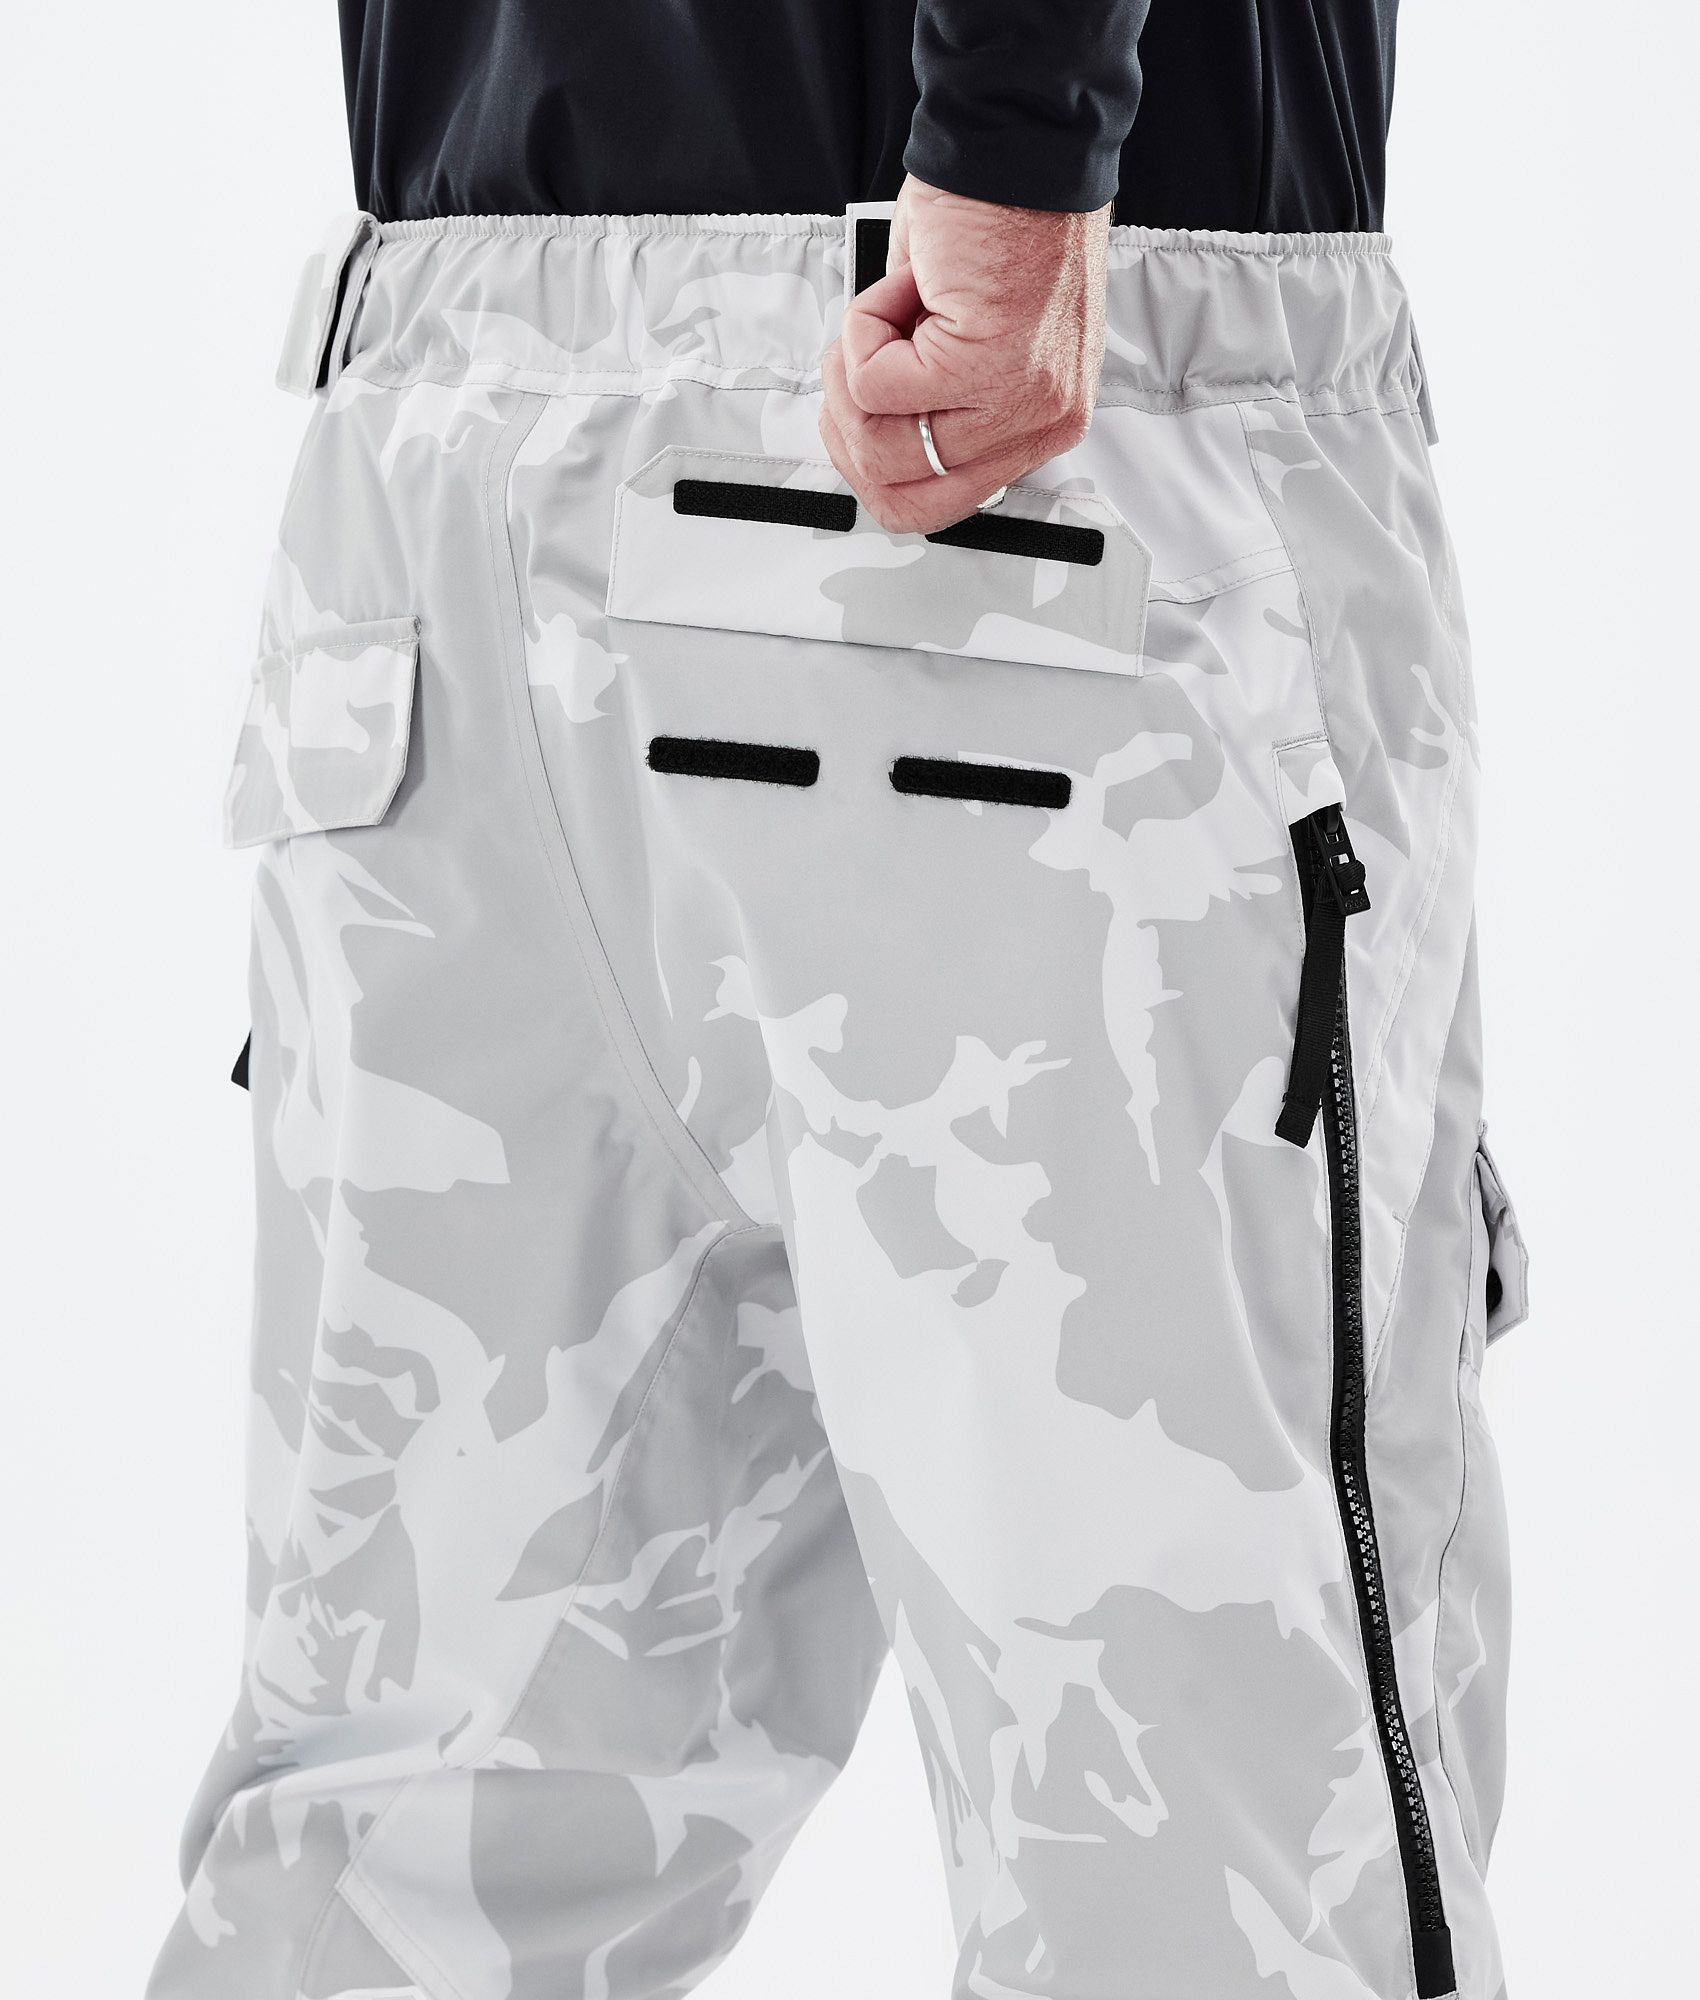 Camouflage Pants Outfits For Men | Camo pants outfit men, Pants outfit men, Camo  pants outfit